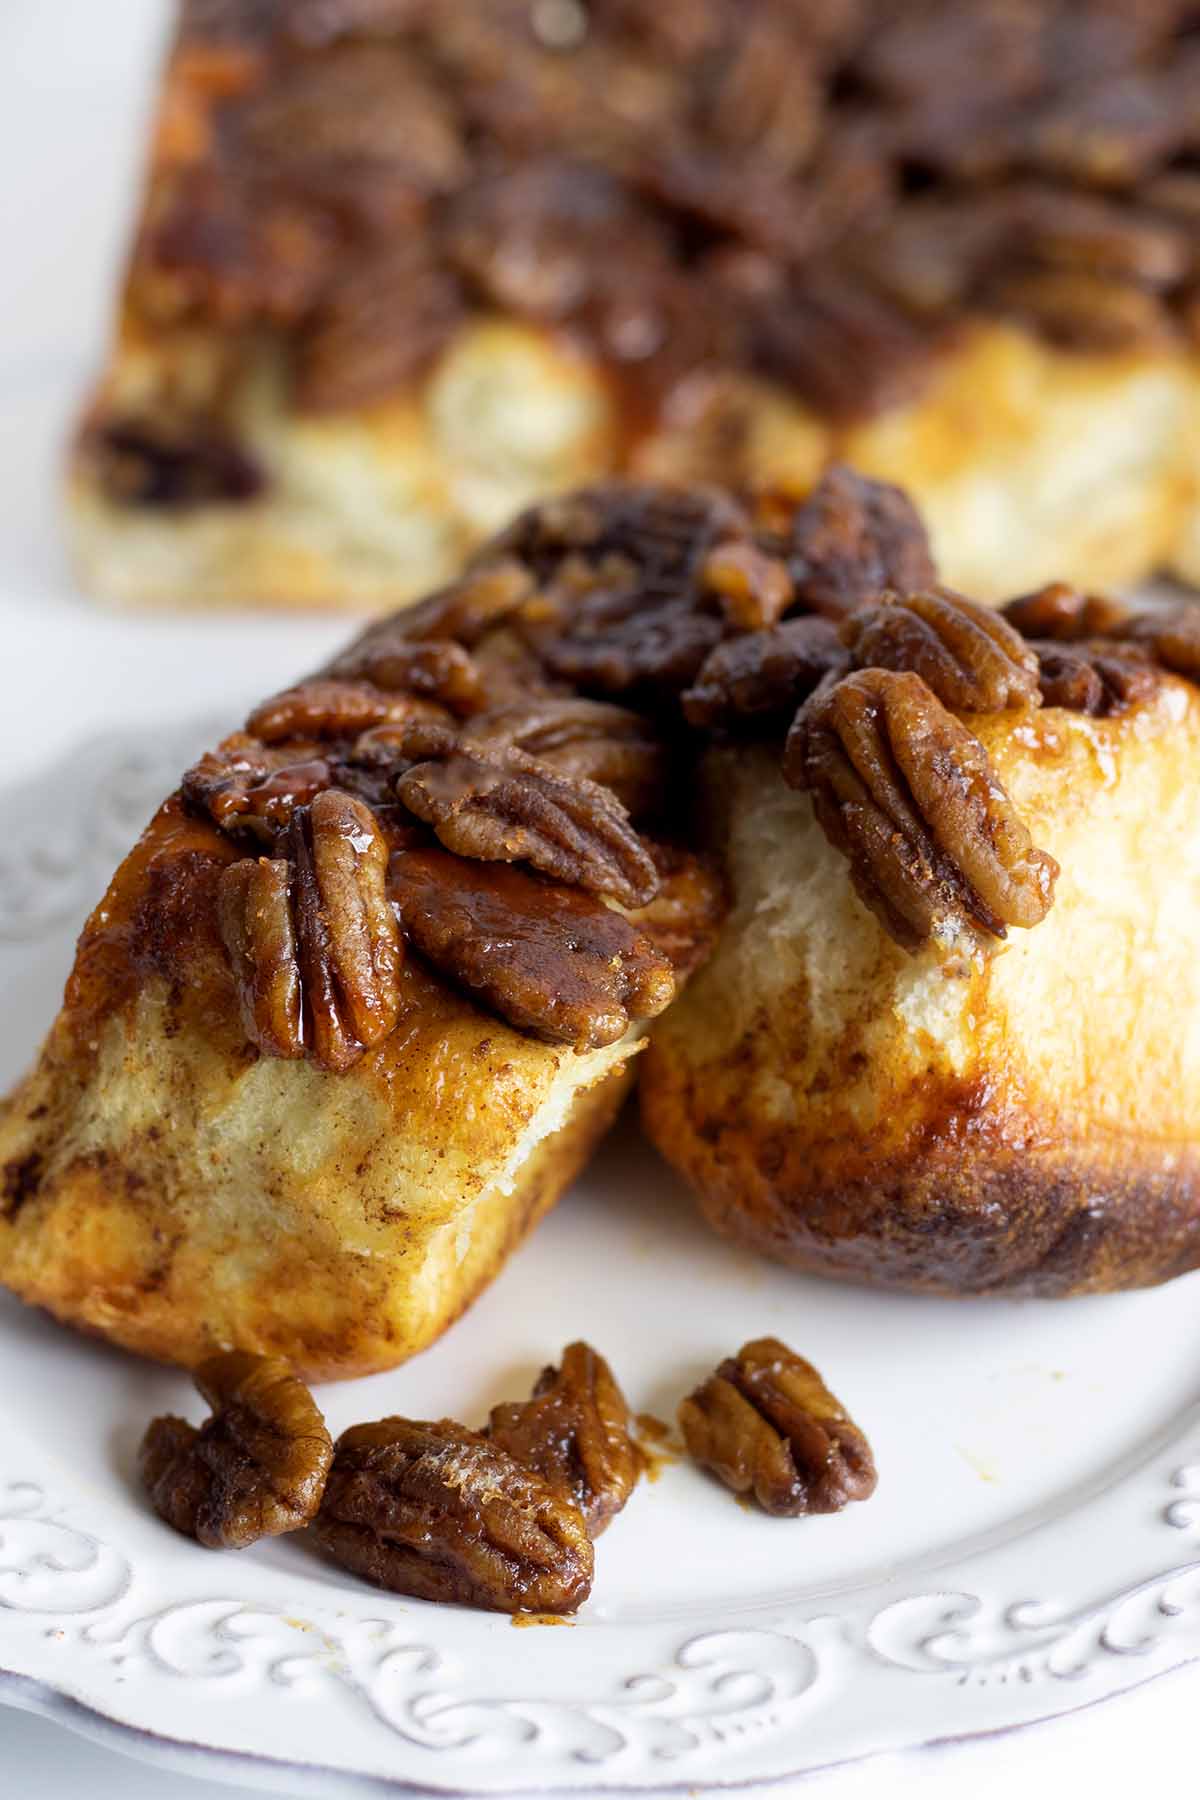 Three caramel pull apart rolls on a white plate with pecans.